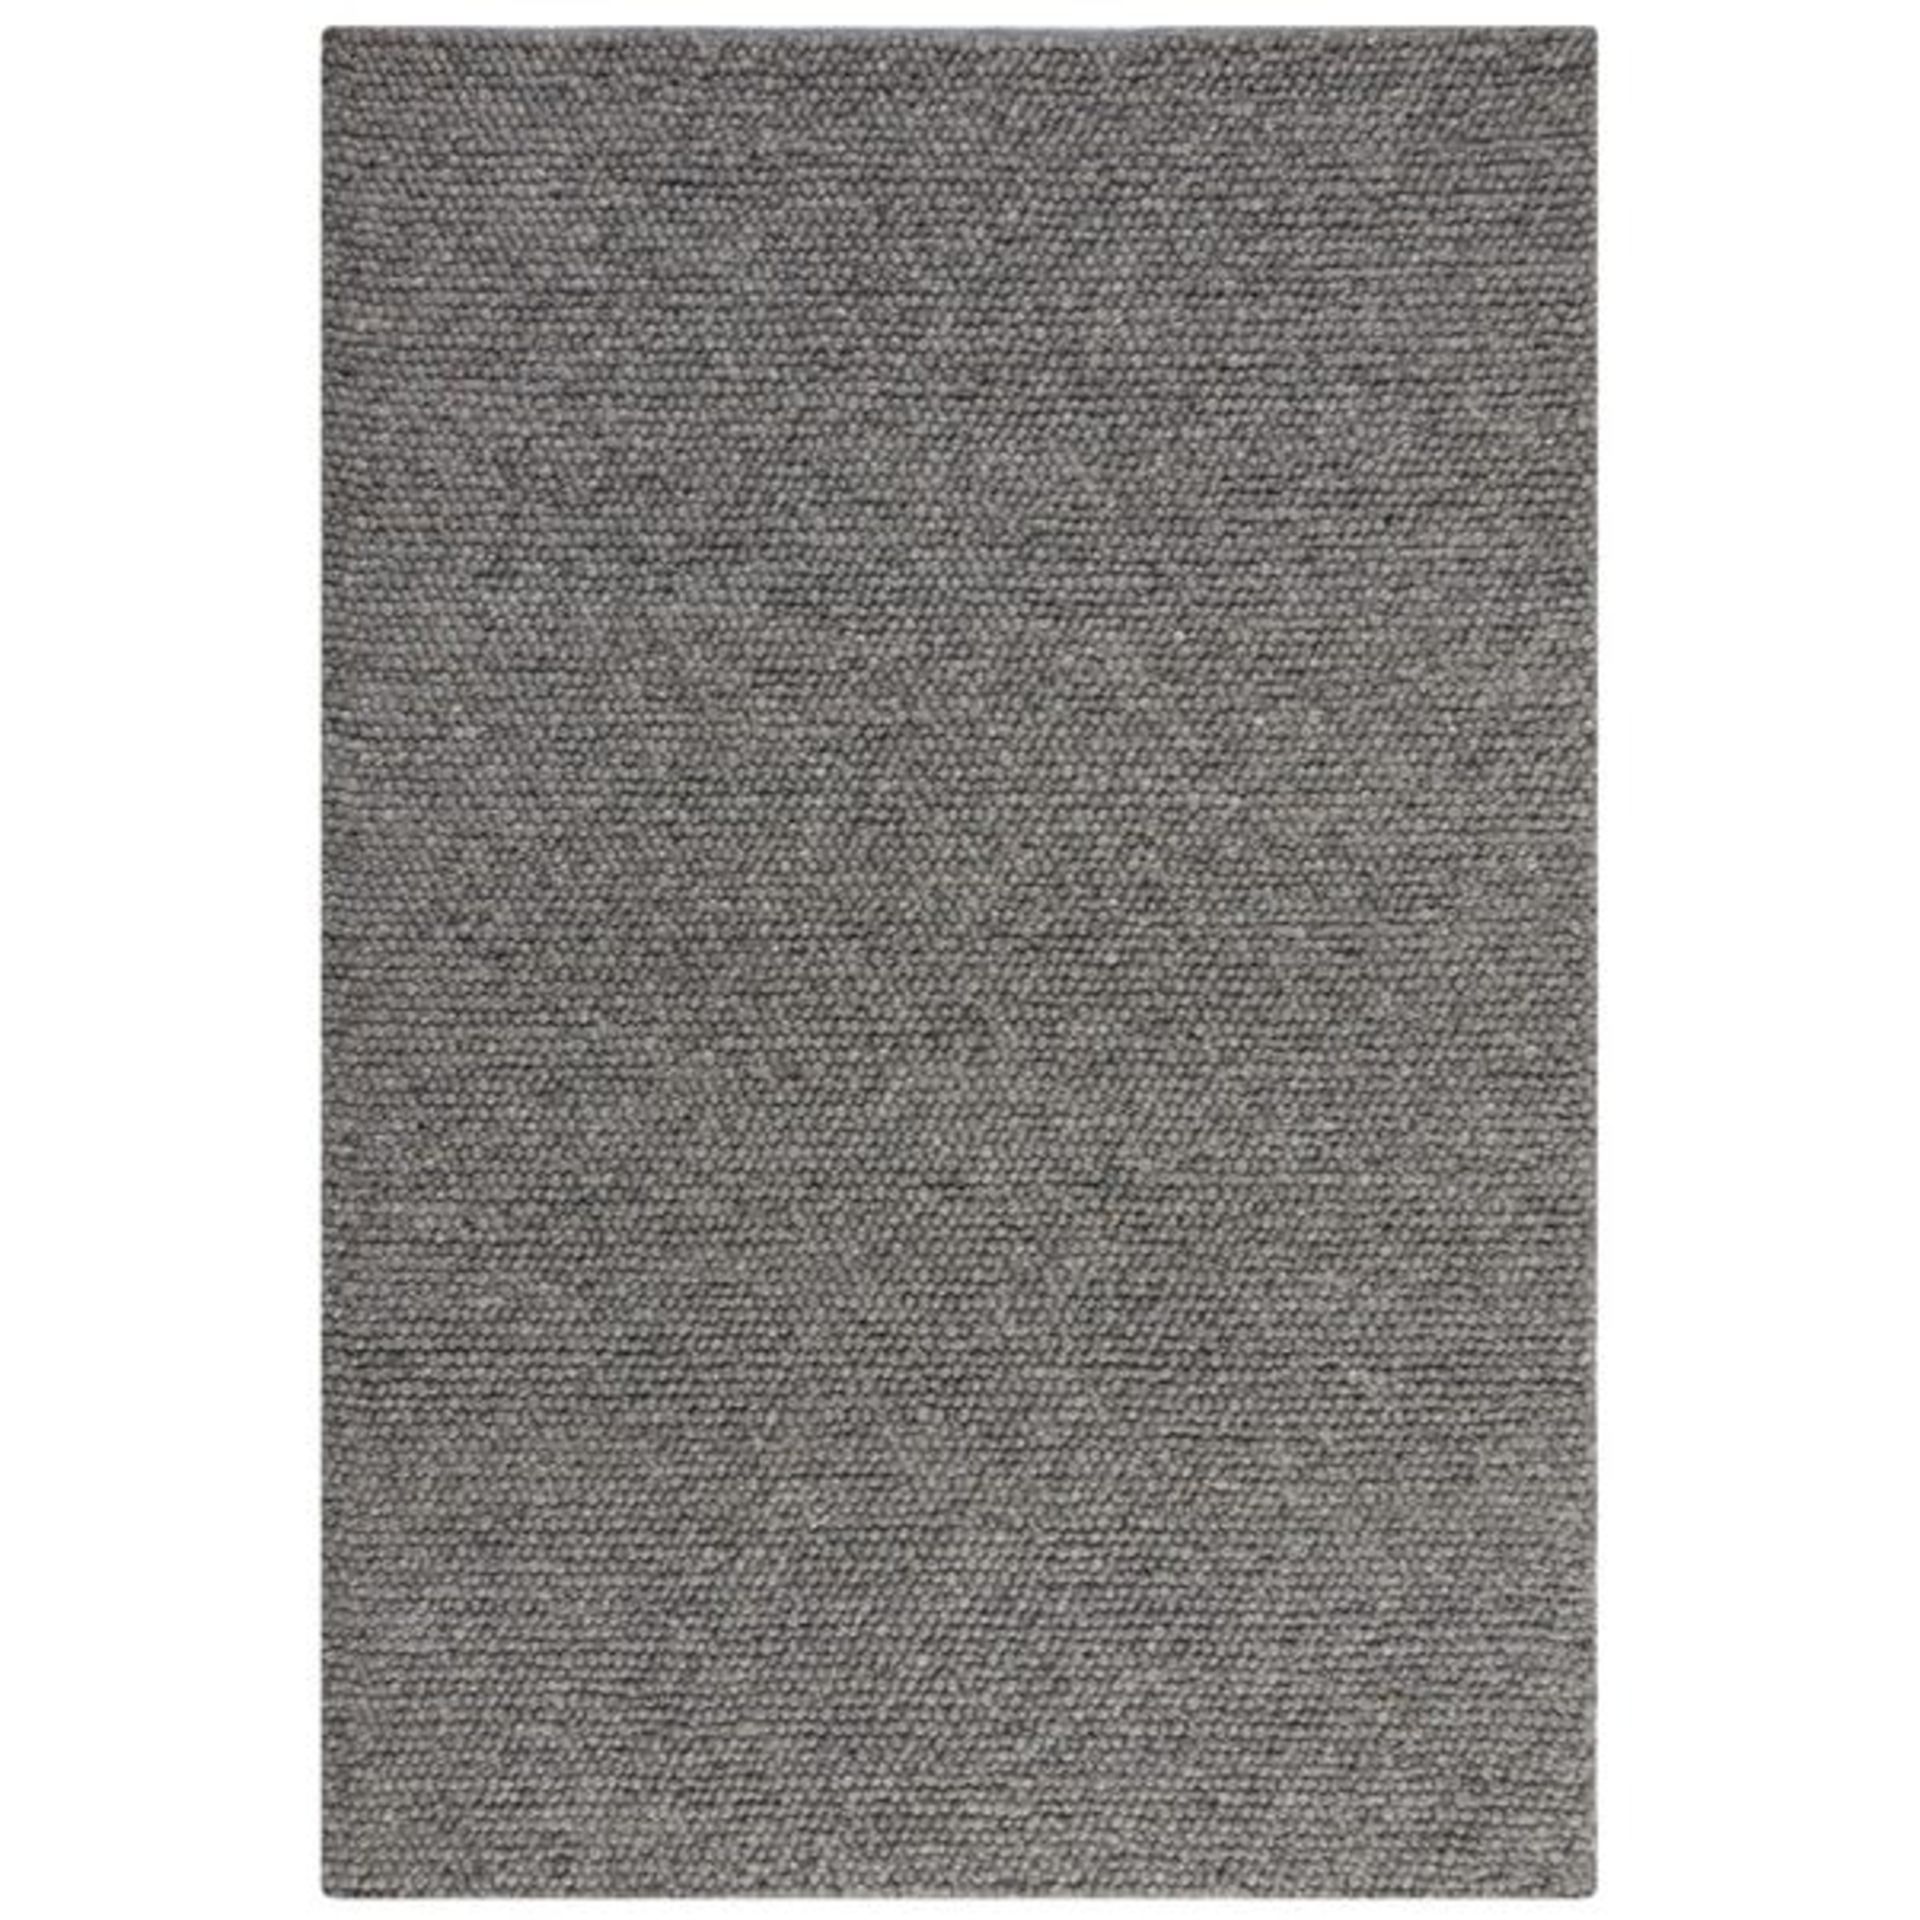 Pebble D040 Rug Pebble Charcoal Rectangle 120X170cm RRP 165About the Product(s)Pebble D040 Rug